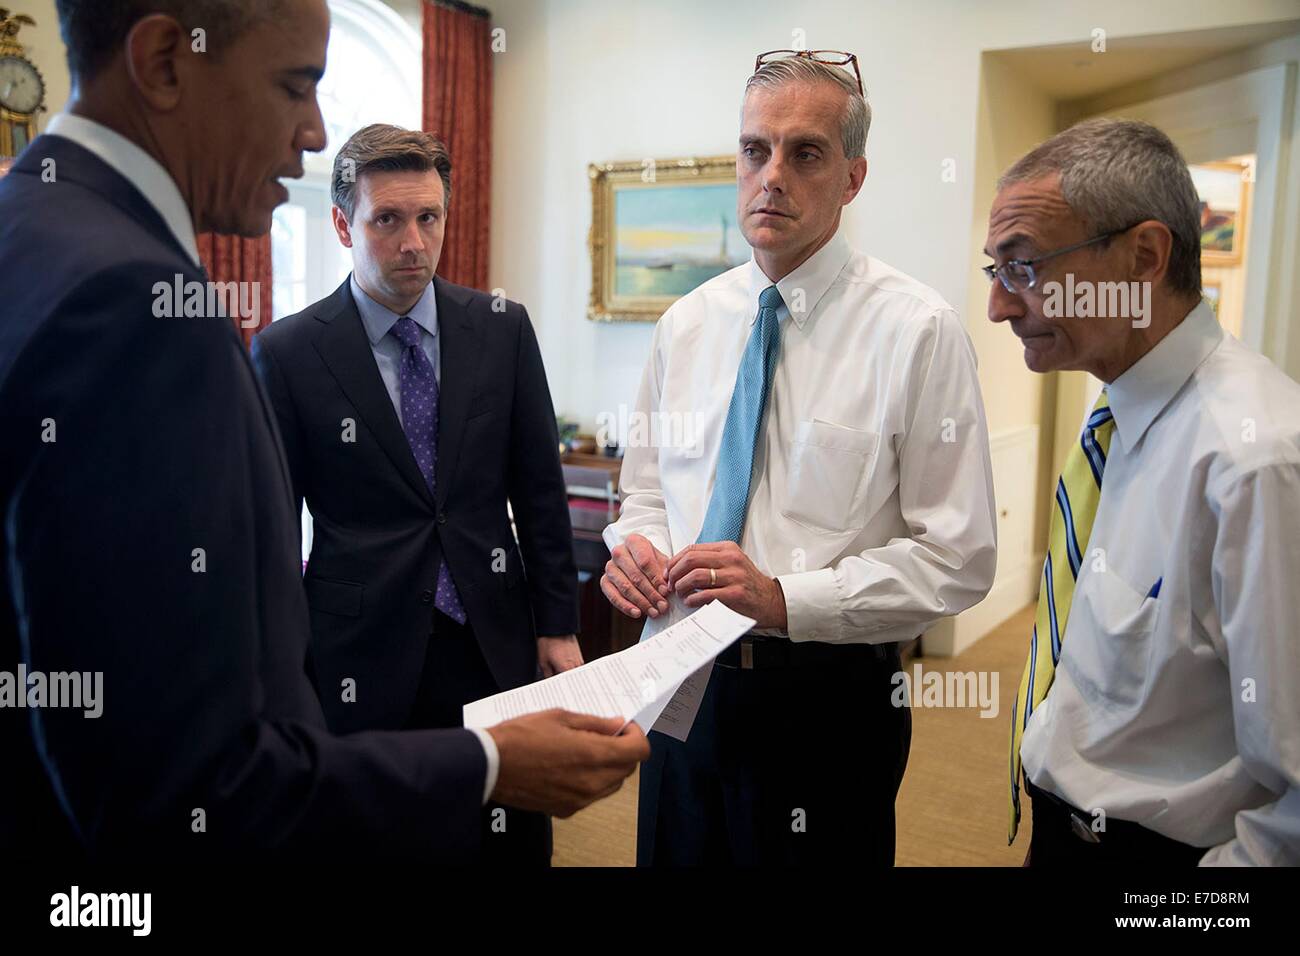 US President Barack Obama talks with advisors in the Outer Oval Office before delivering a statement on the crash of Malaysia Airlines Flight 17 and the situation in Ukraine, July 18, 2014 in Washington, DC. With the President from left are Press Secretary Josh Earnest, Chief of Staff Denis McDonough and John Podesta, Counselor to the President. Stock Photo